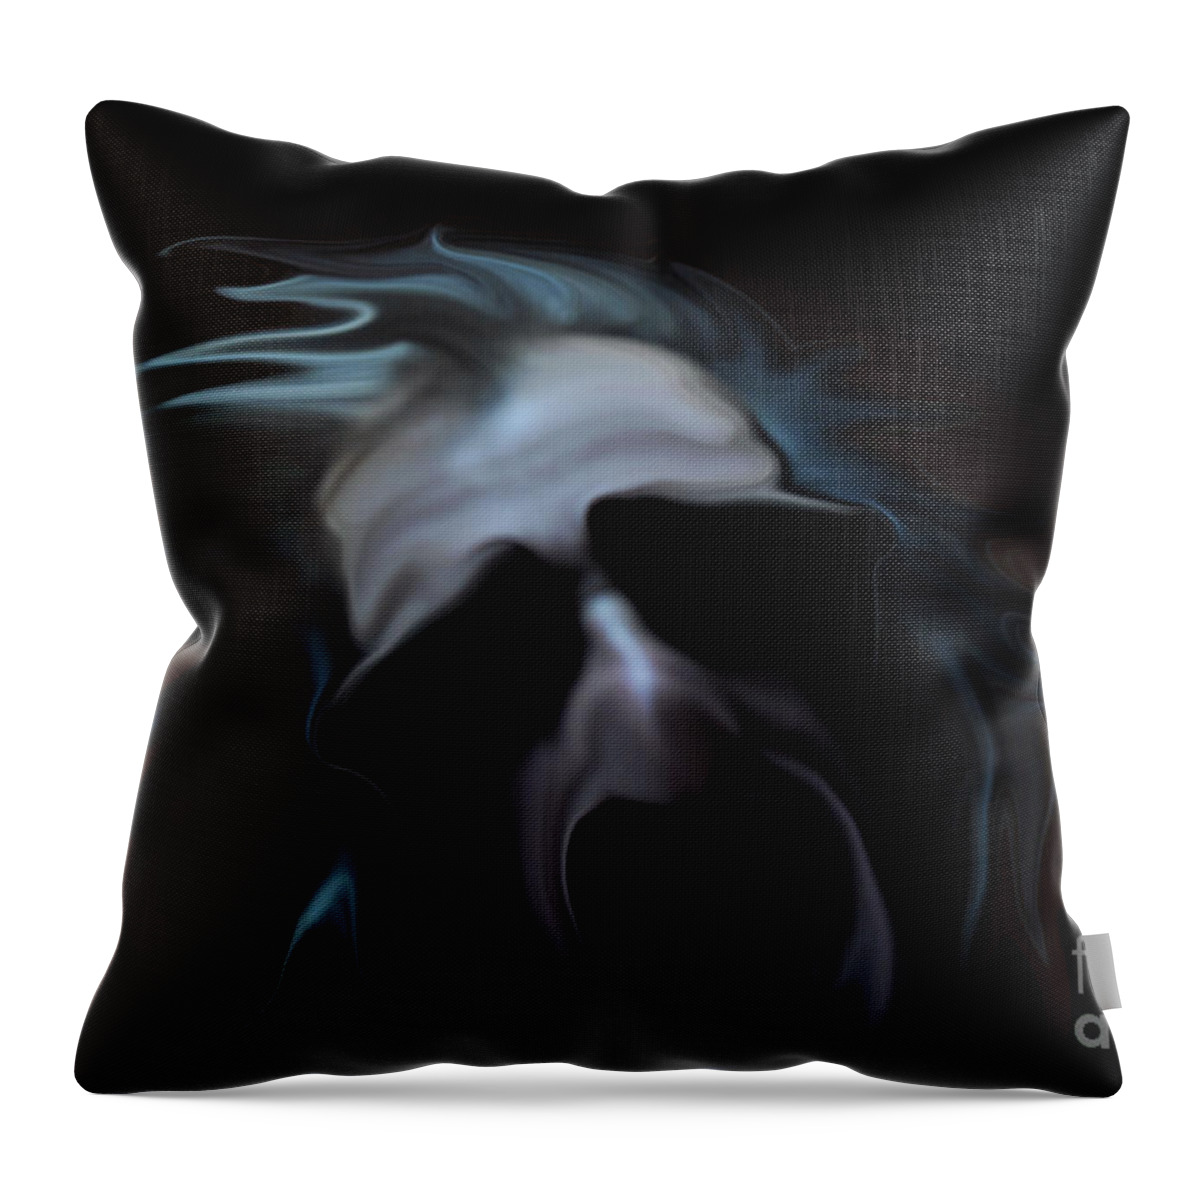 Screams Throw Pillow featuring the photograph The Scream by Reb Frost